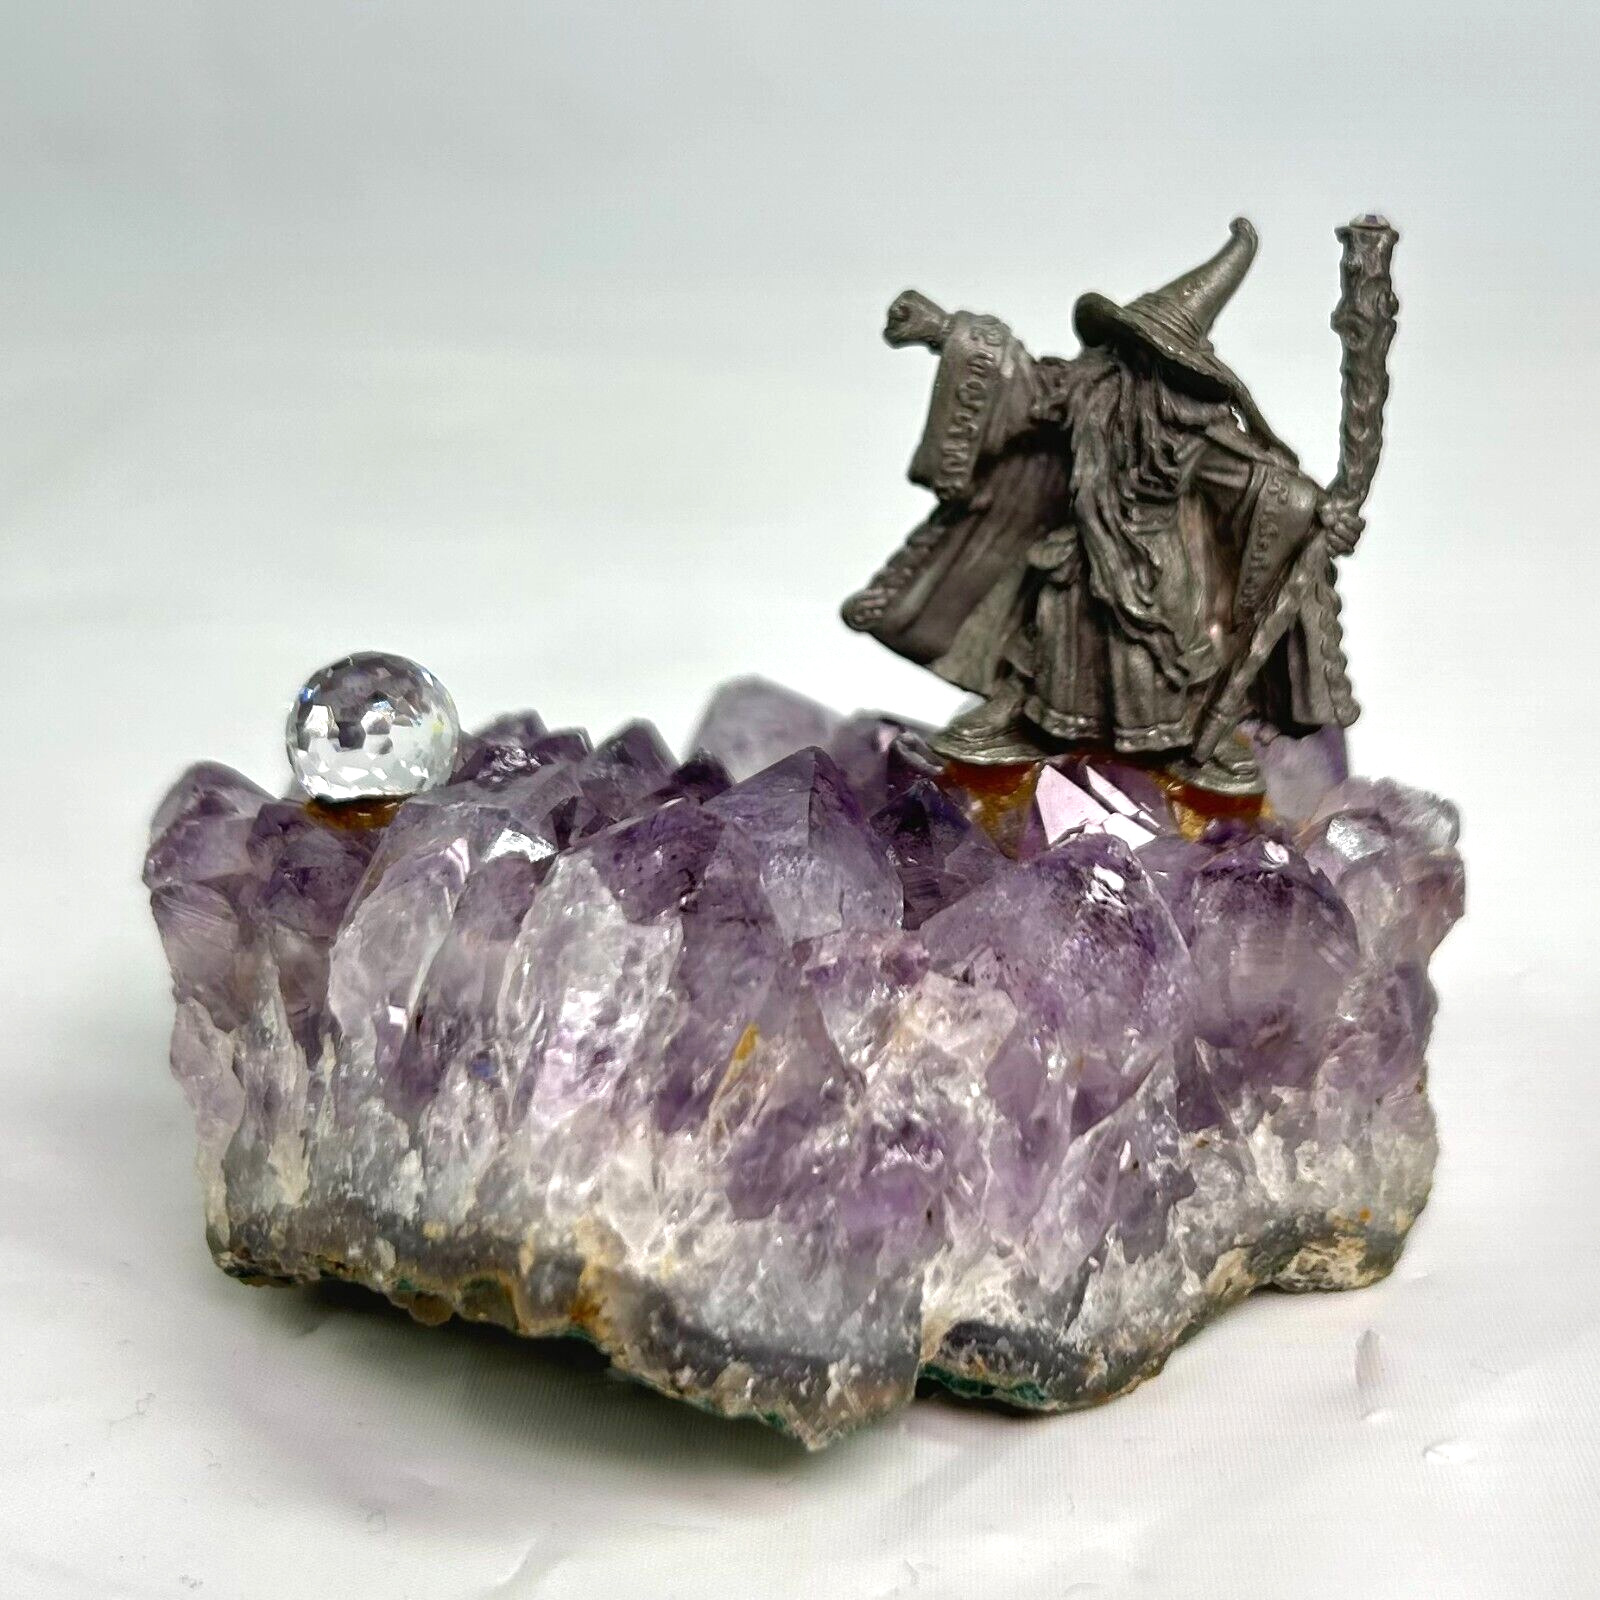 Vintage Pewter Wizard with Crystal on Staff Crystal Ball Amethyst Crystal Geode